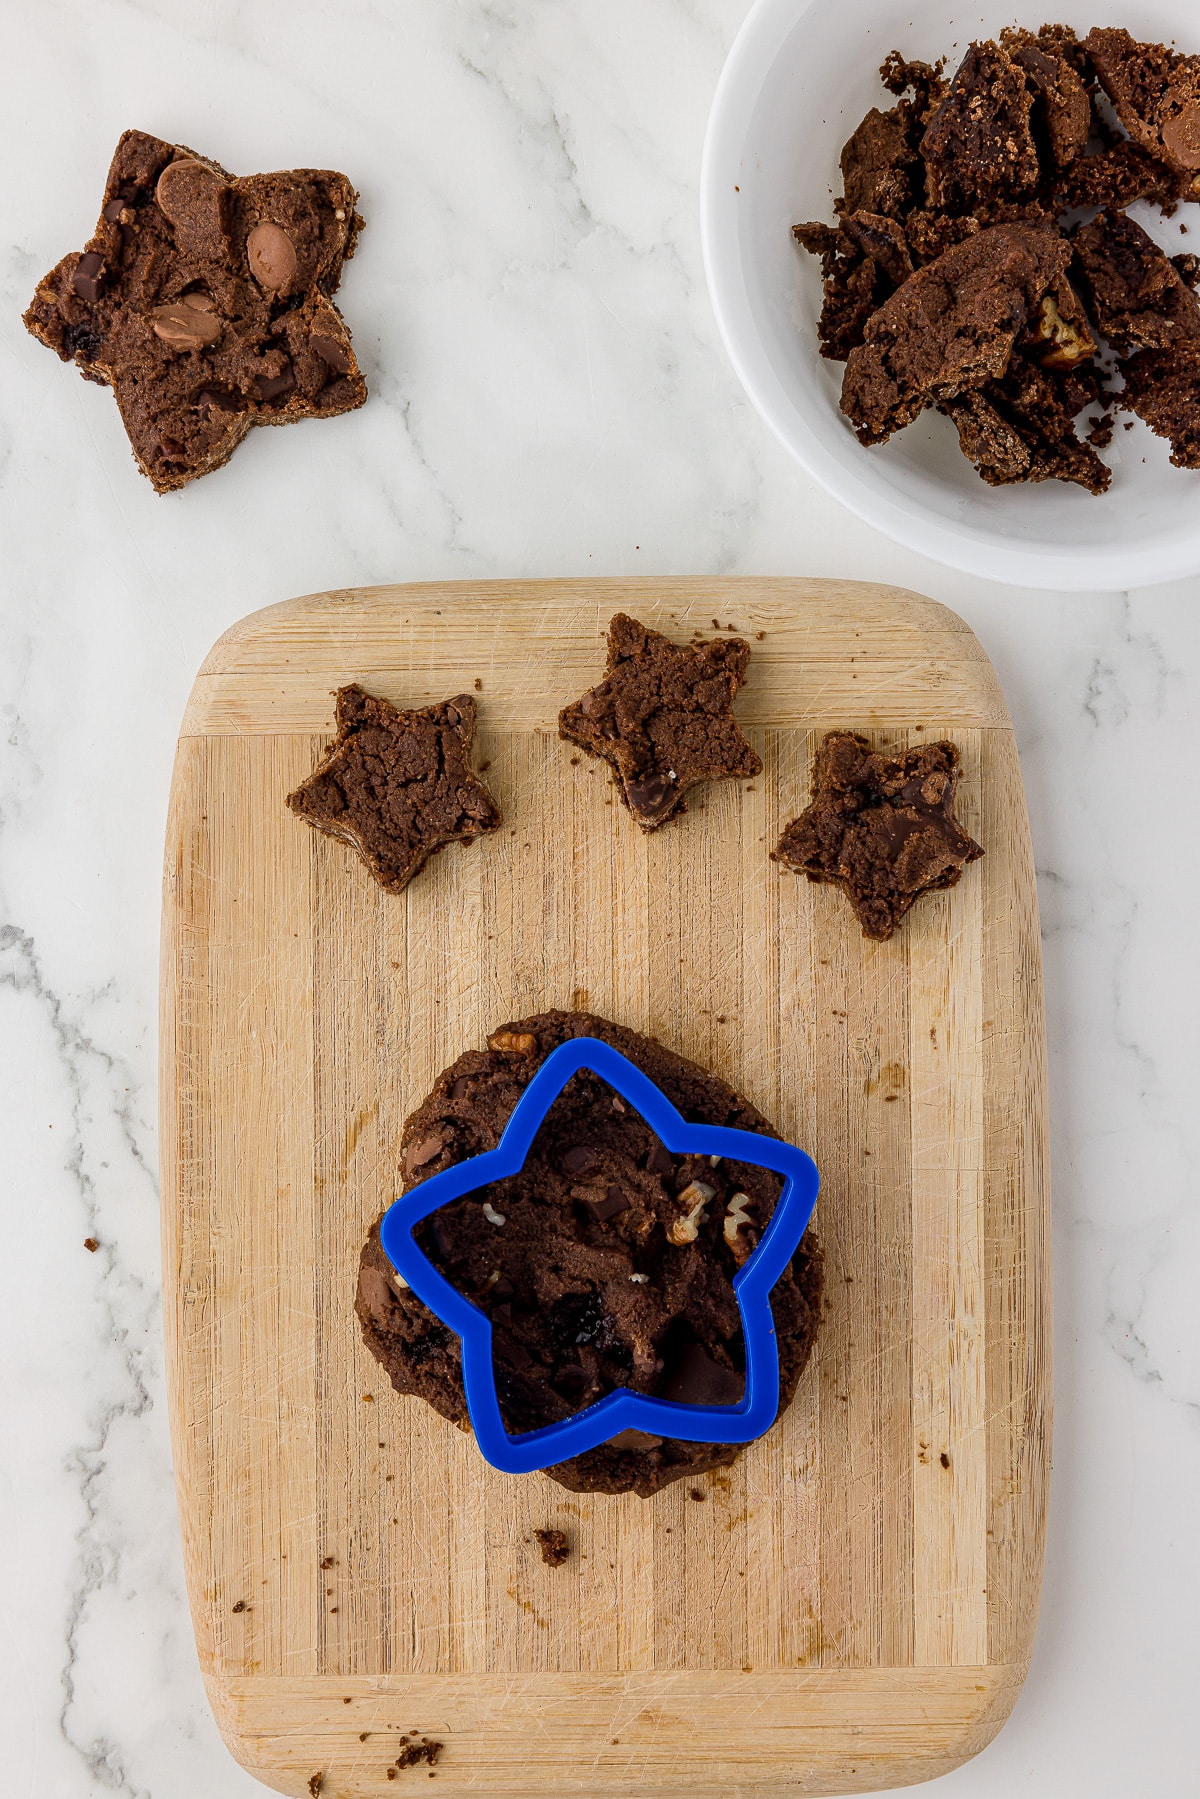 baked chocolate walnut cookies being cut into star shapes on a light cutting board.